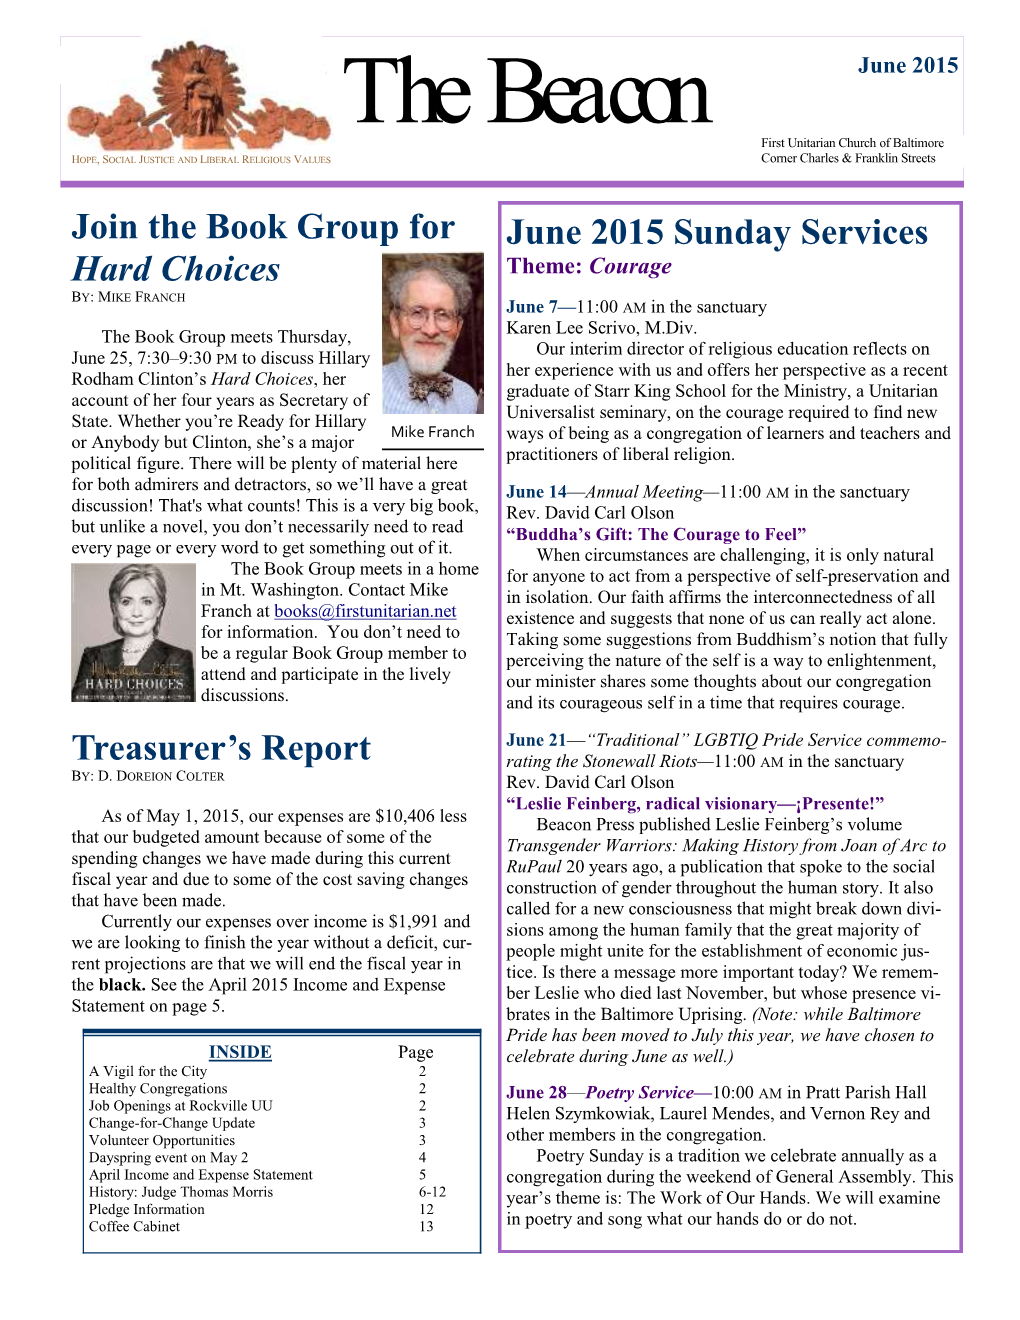 The Beacon June 2015 First Unitarian Church News a Vigil for the City Healthy Congregations BY: D